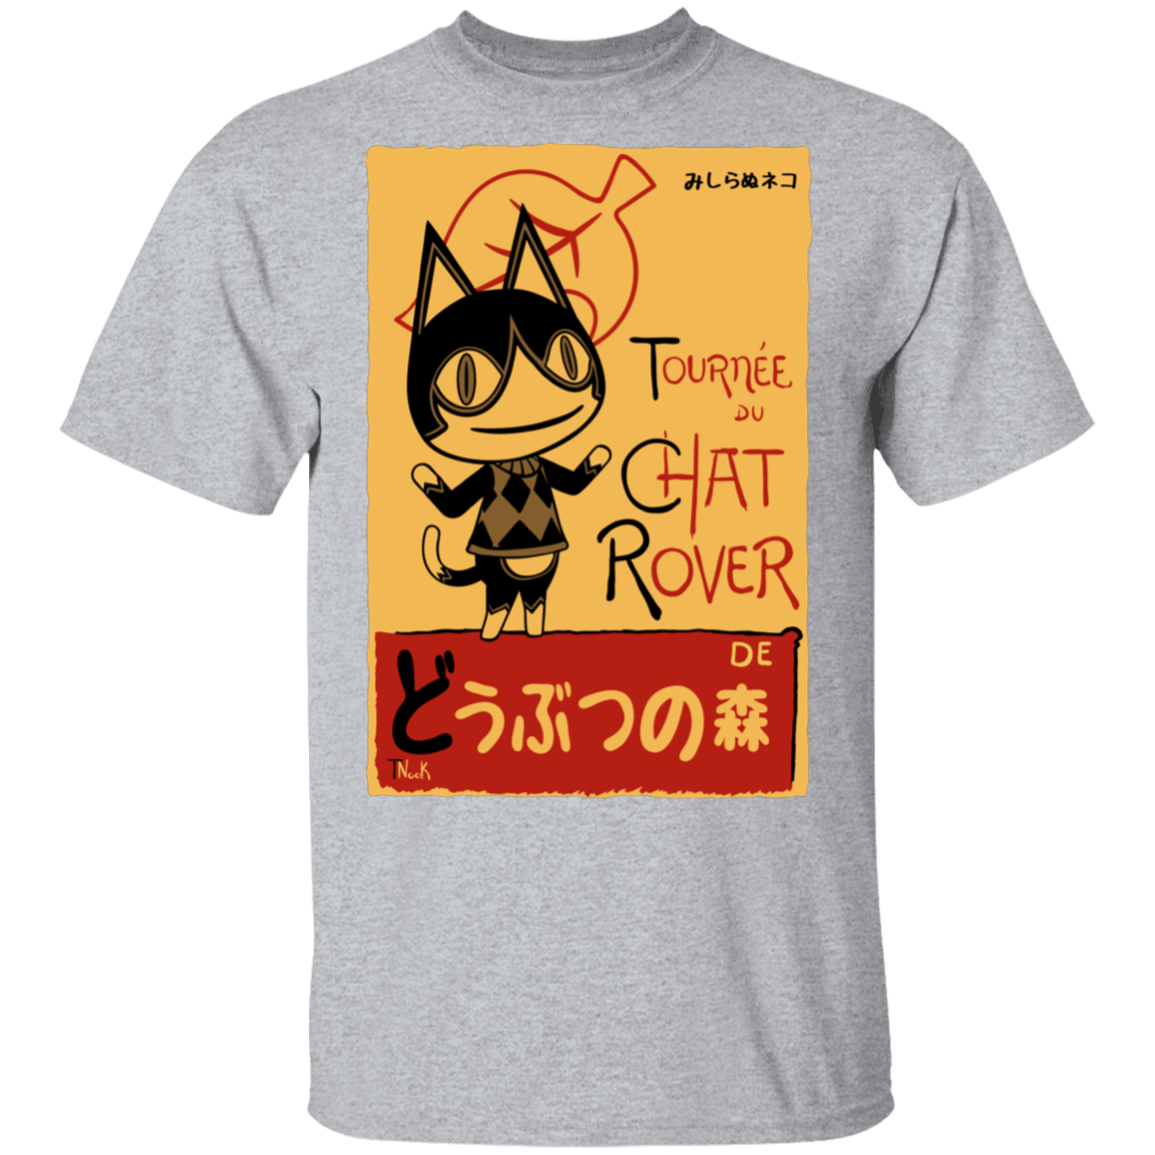 T-Shirts Sport Grey / S Chat Rover T-Shirt